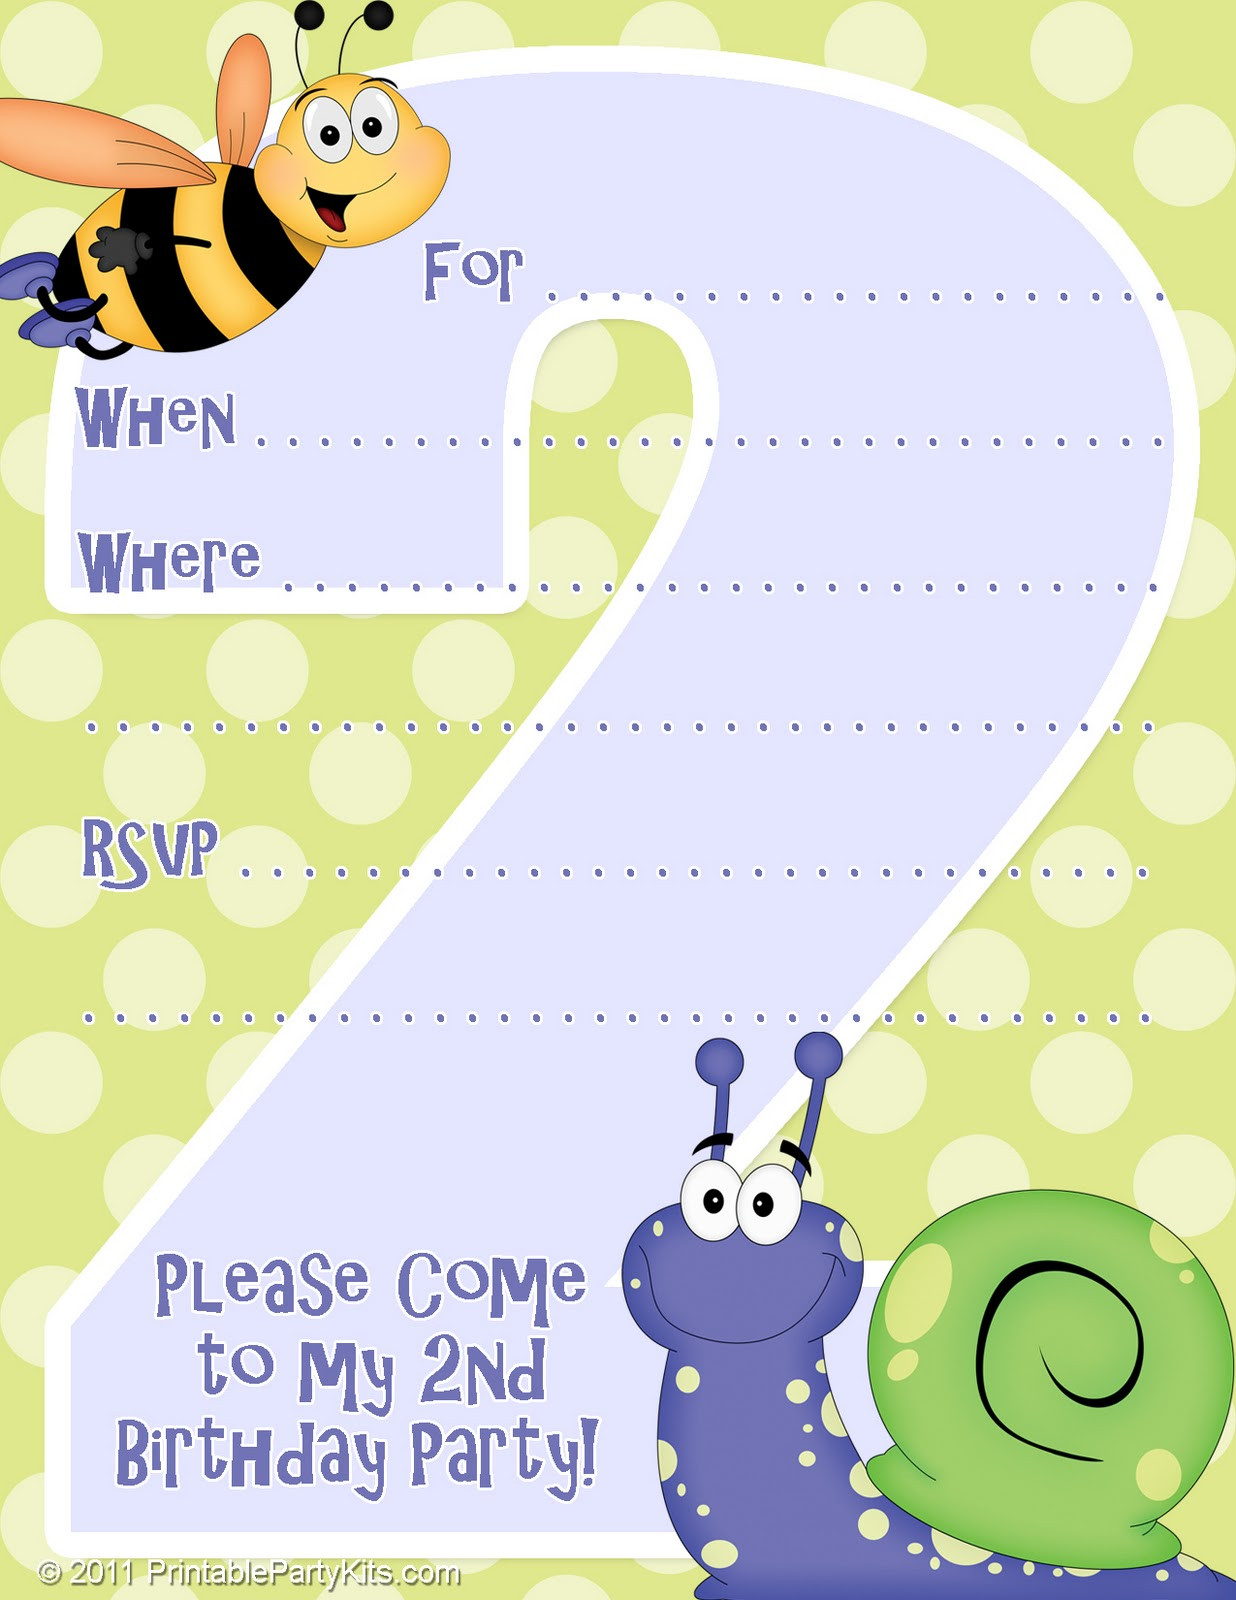 2nd Birthday Party Invitations
 Free Printable Party Invitations Invitation Template for